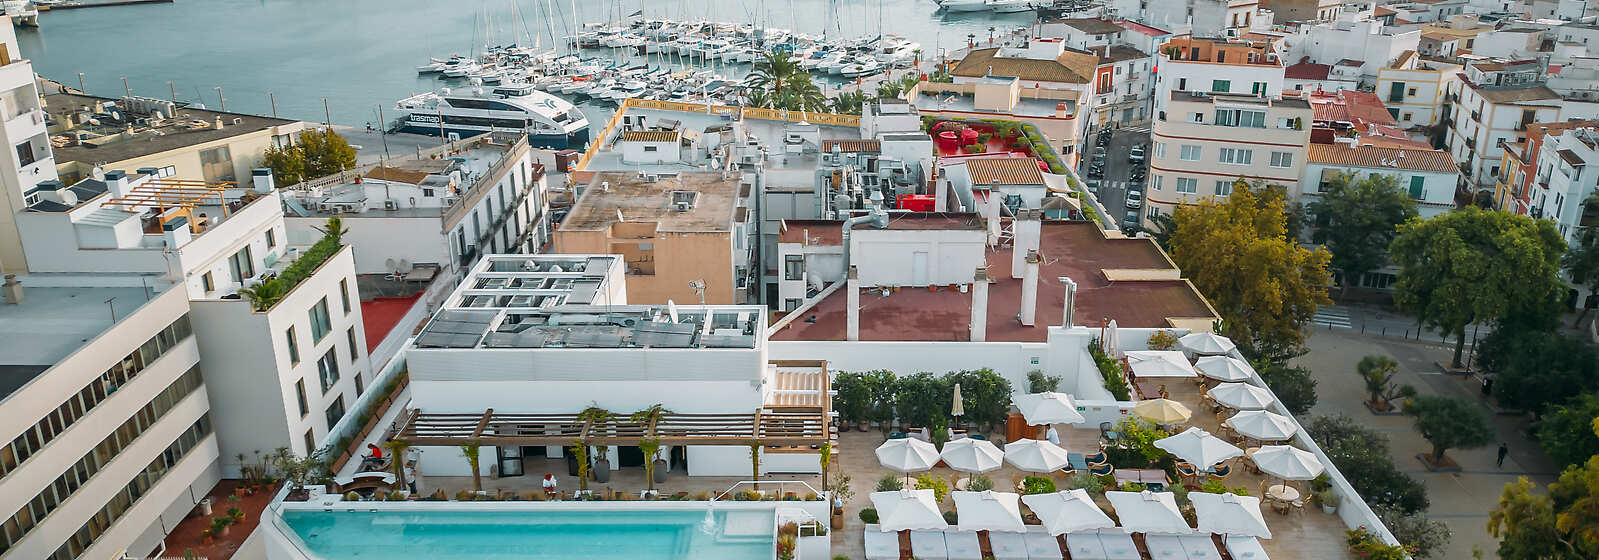 Aerial view of The Standard, Ibiza 